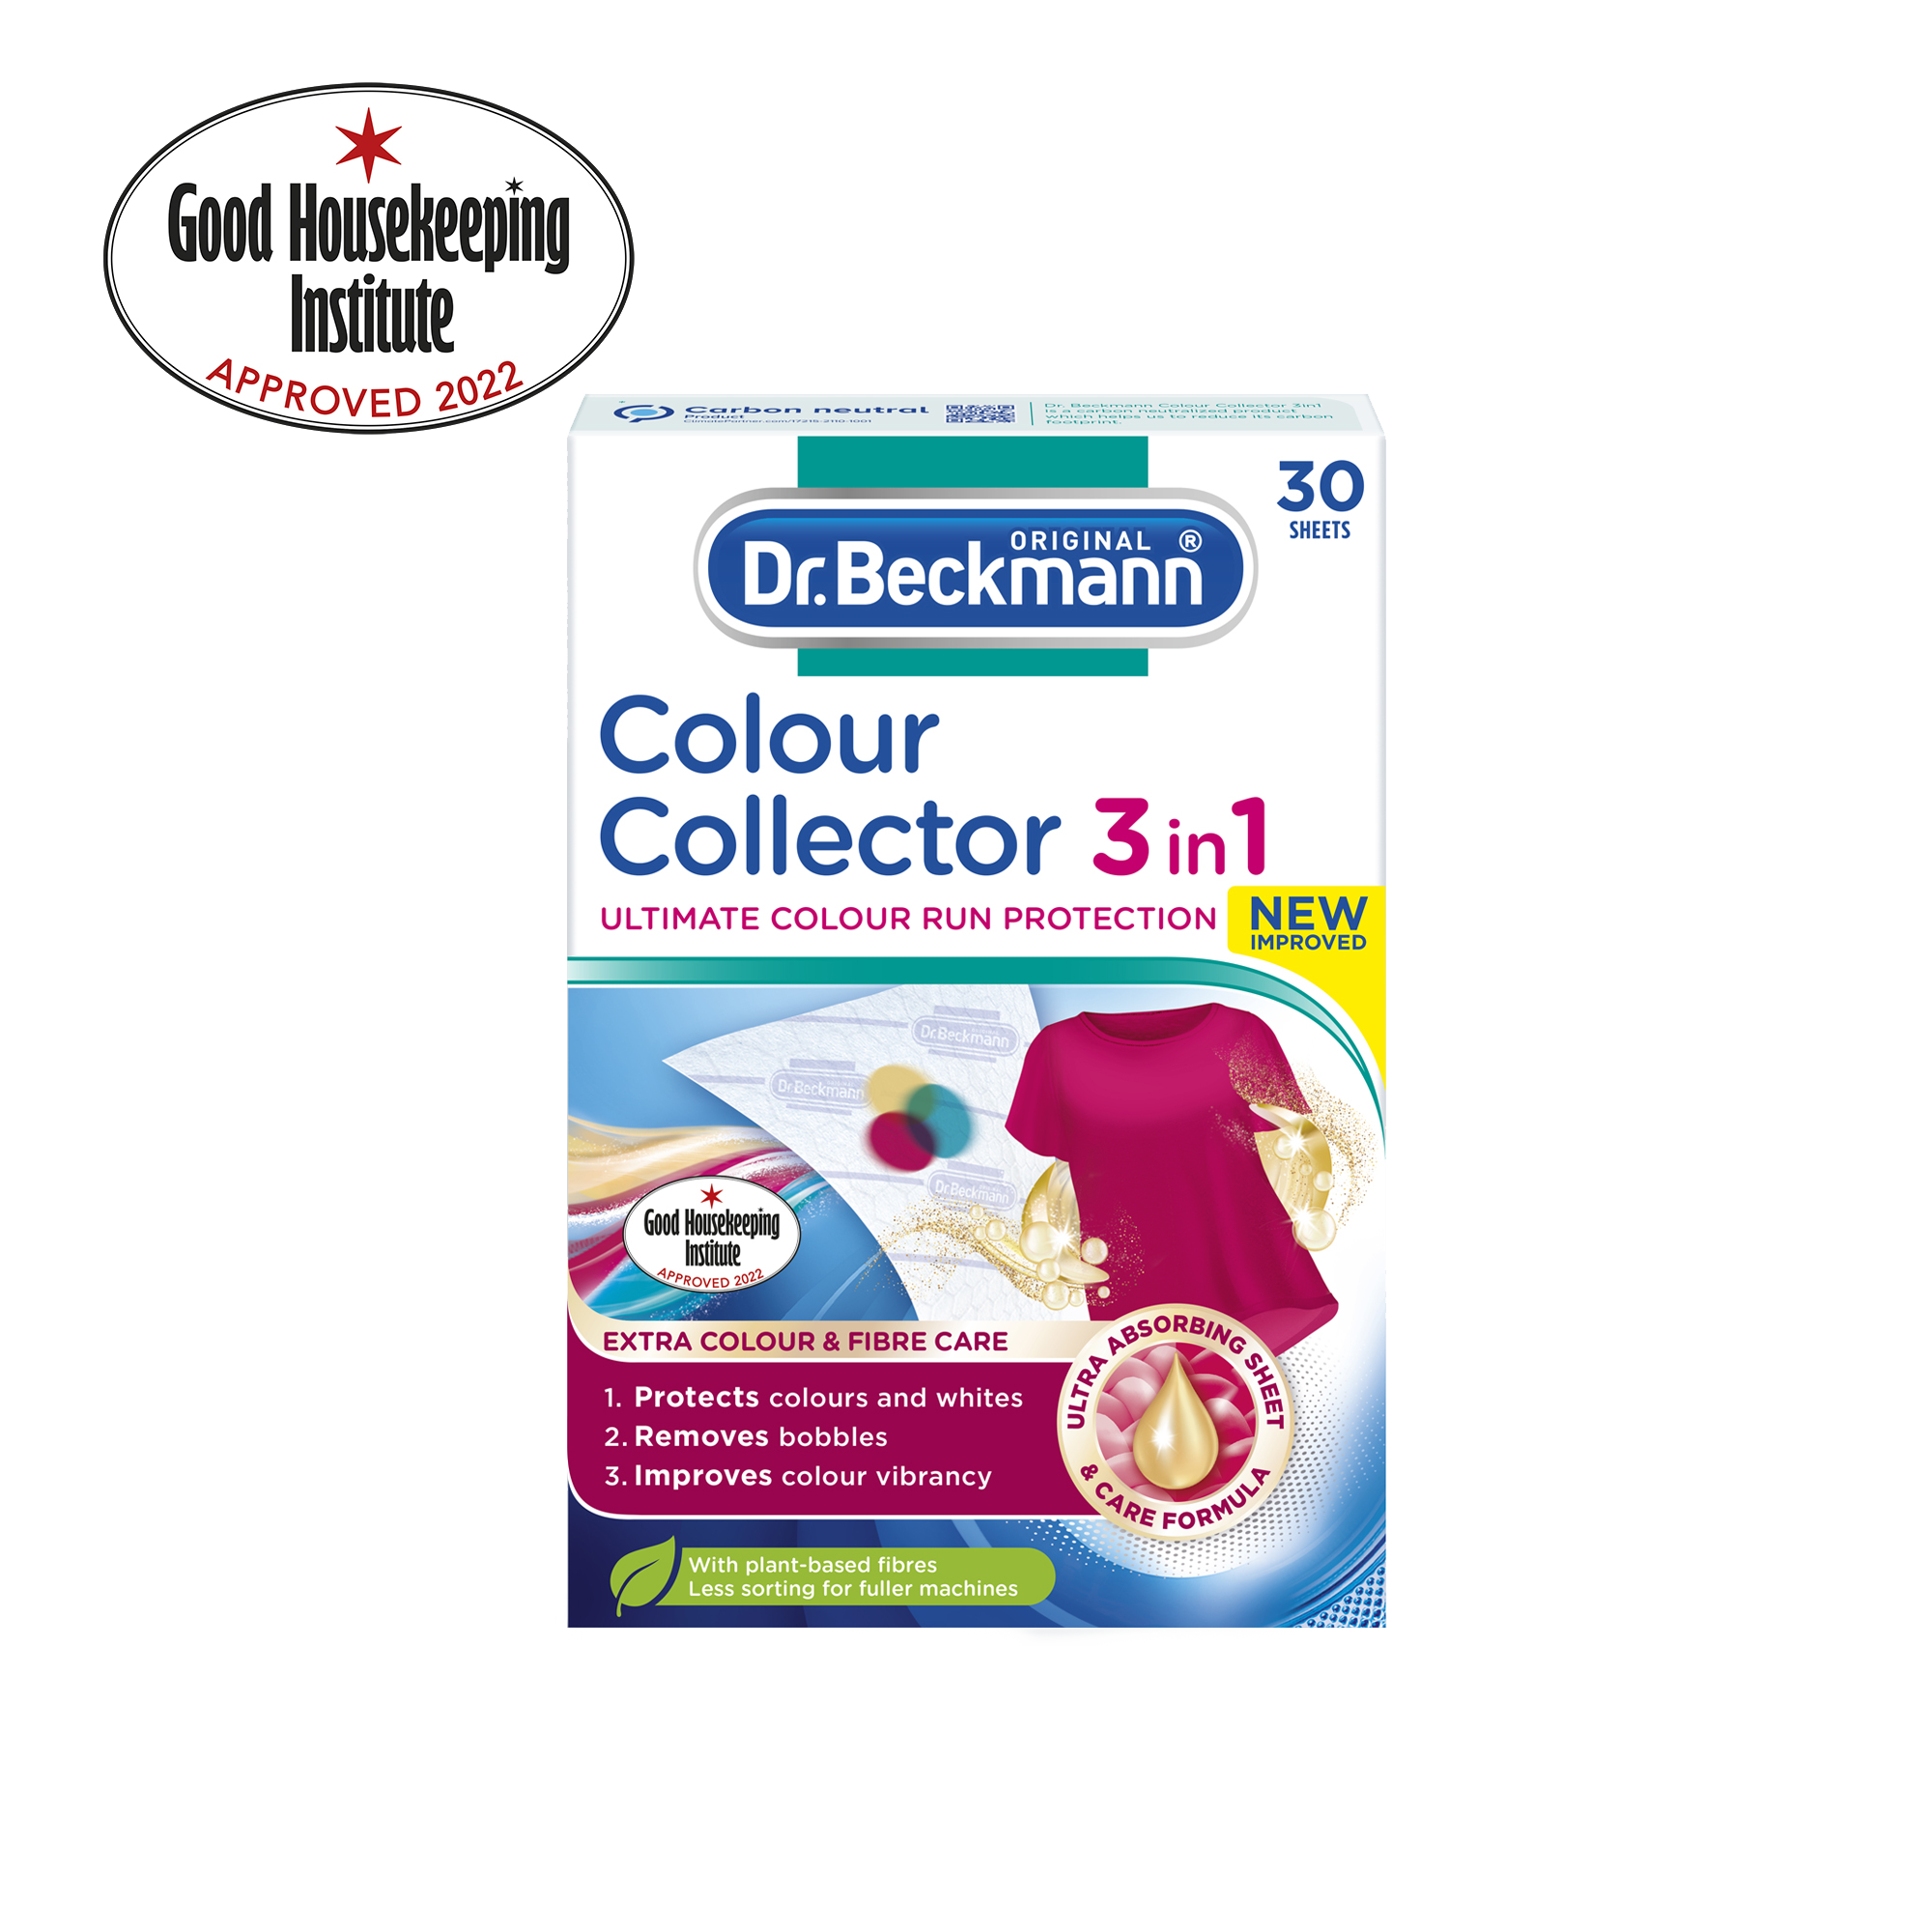 https://www.dr-beckmann.co.uk/wp-content/uploads/2020/10/ColourCollector3in1_30SheetGHI-copy.png